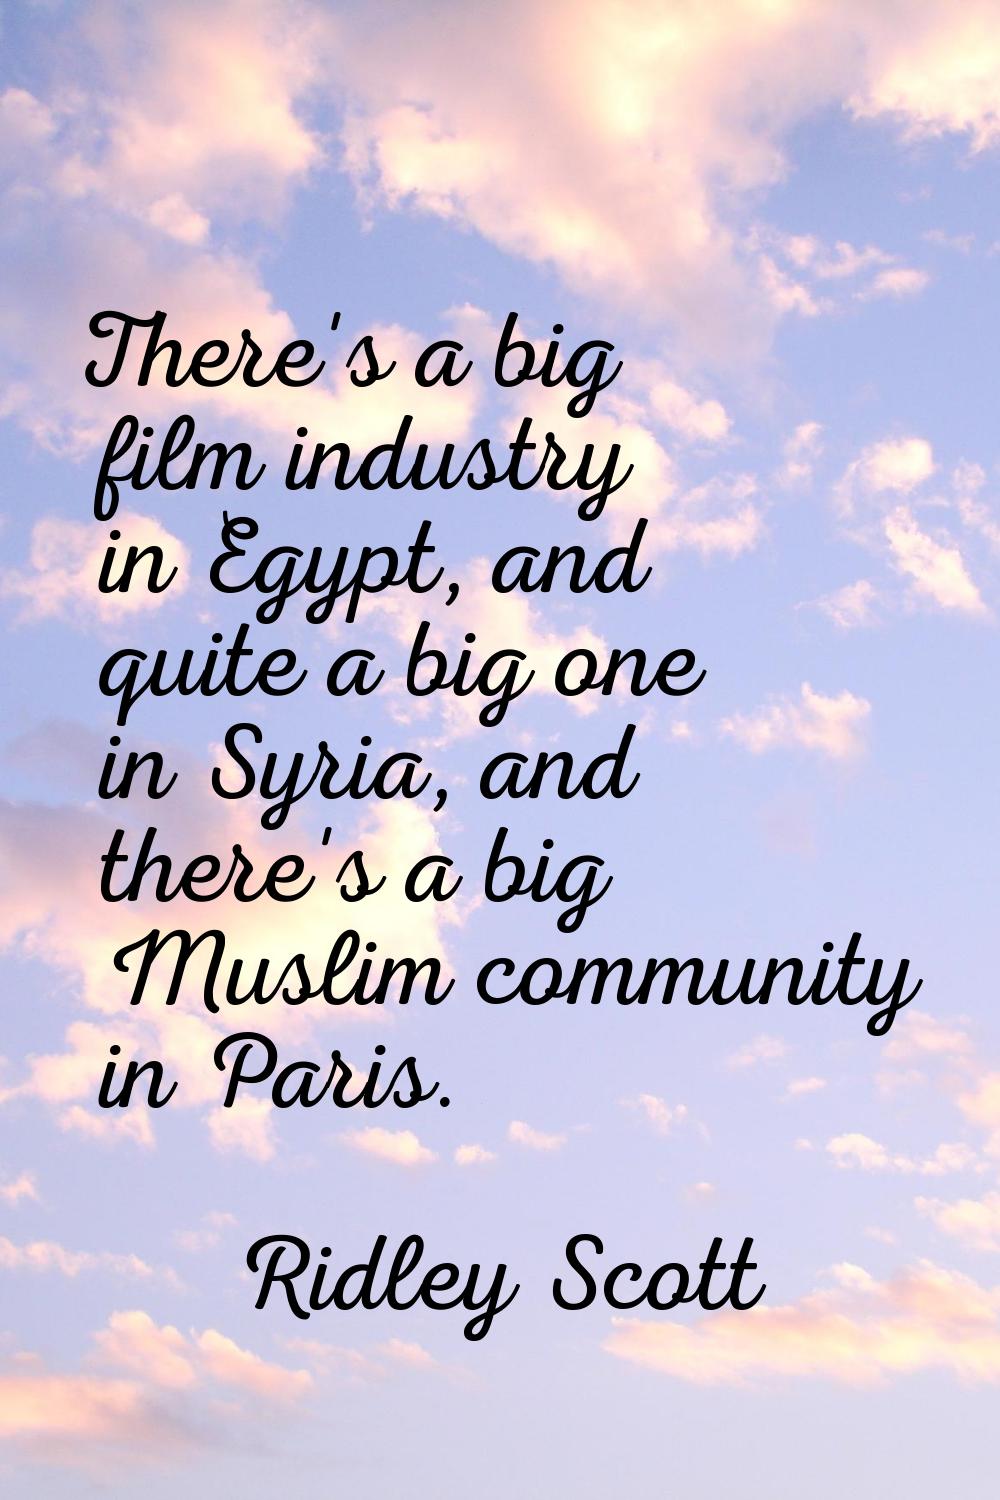 There's a big film industry in Egypt, and quite a big one in Syria, and there's a big Muslim commun